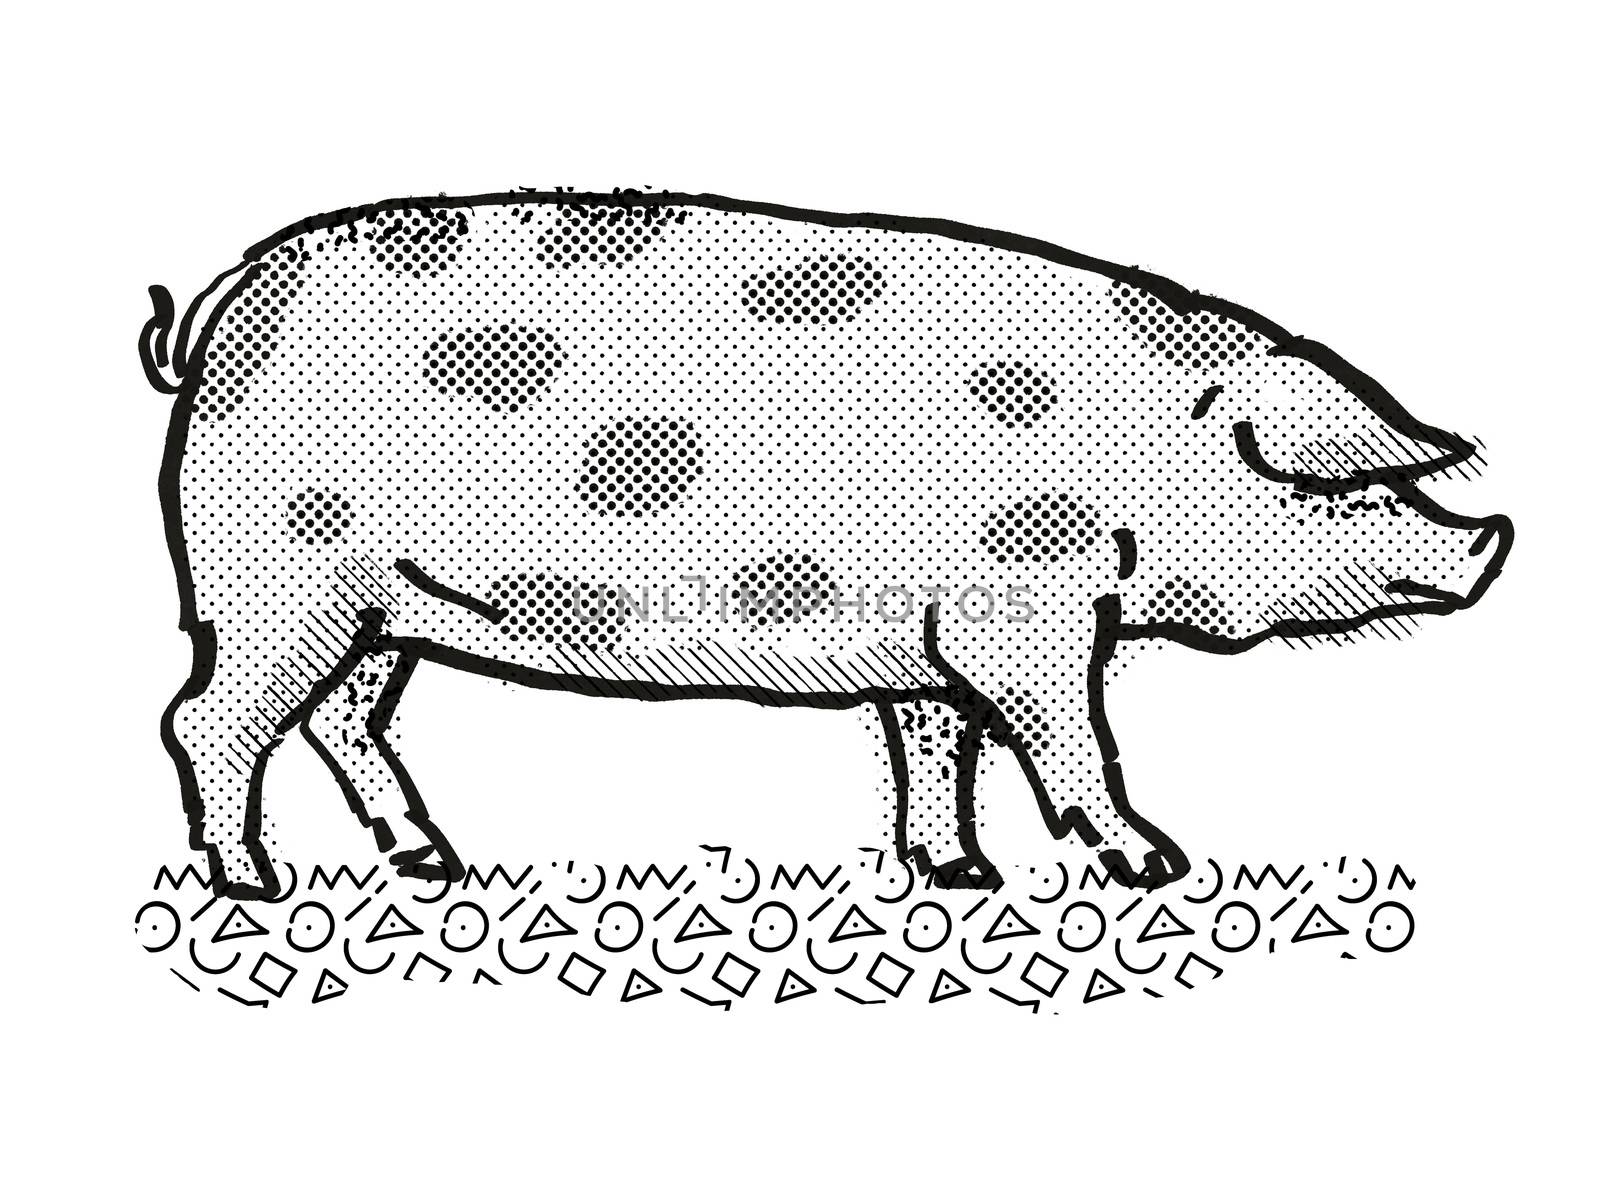 Retro cartoon style drawing of an Oxford Sandy and Black  sow or boar, a pig breed viewed from side on isolated white background done in black and white